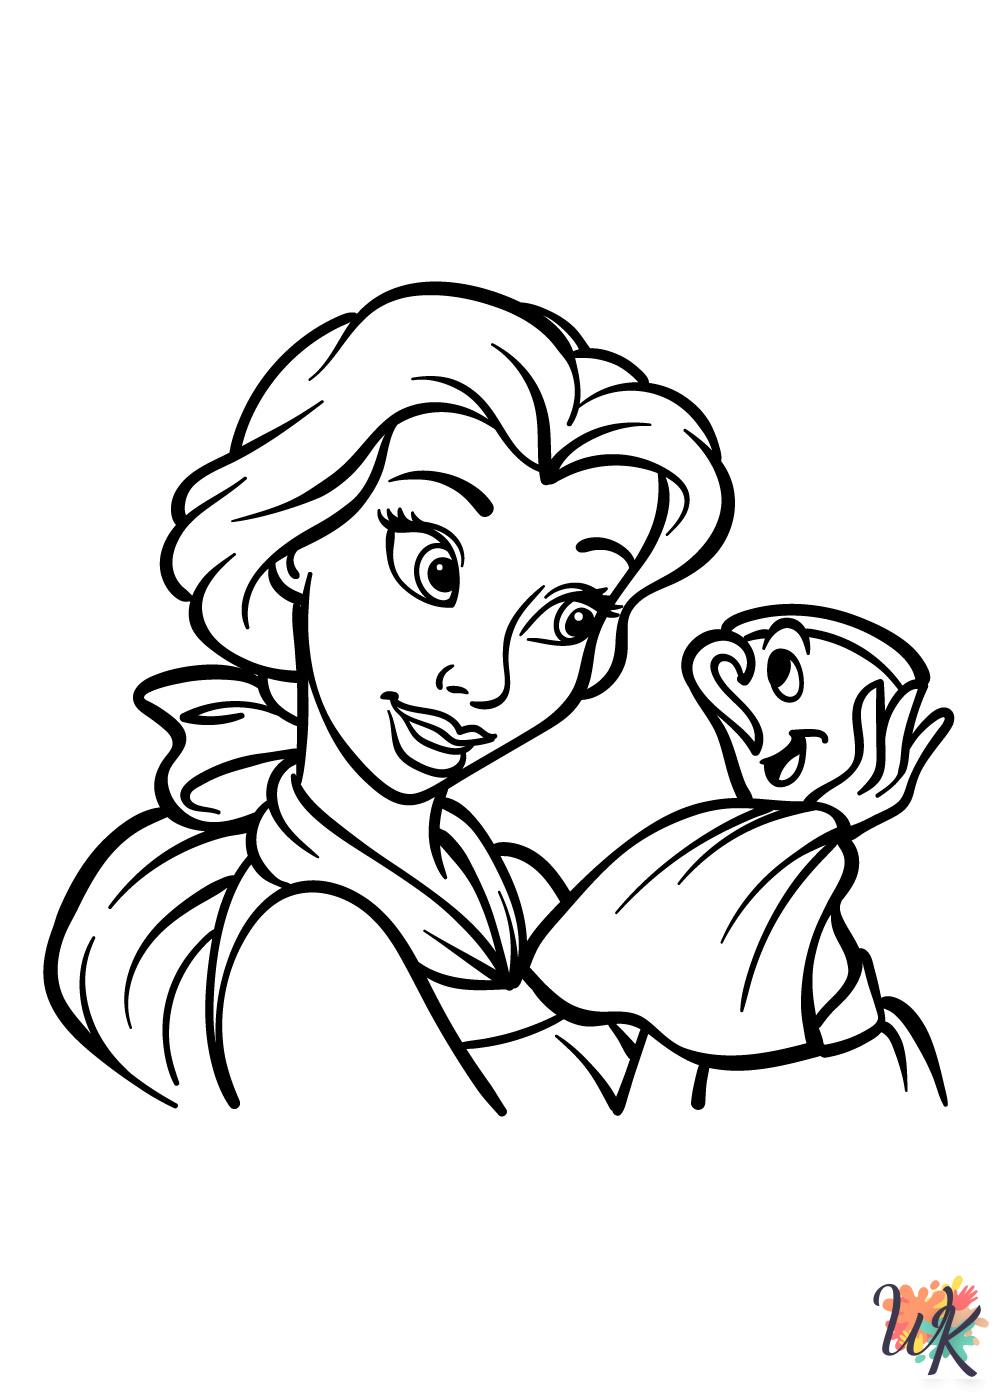 Belle coloring pages for adults pdf